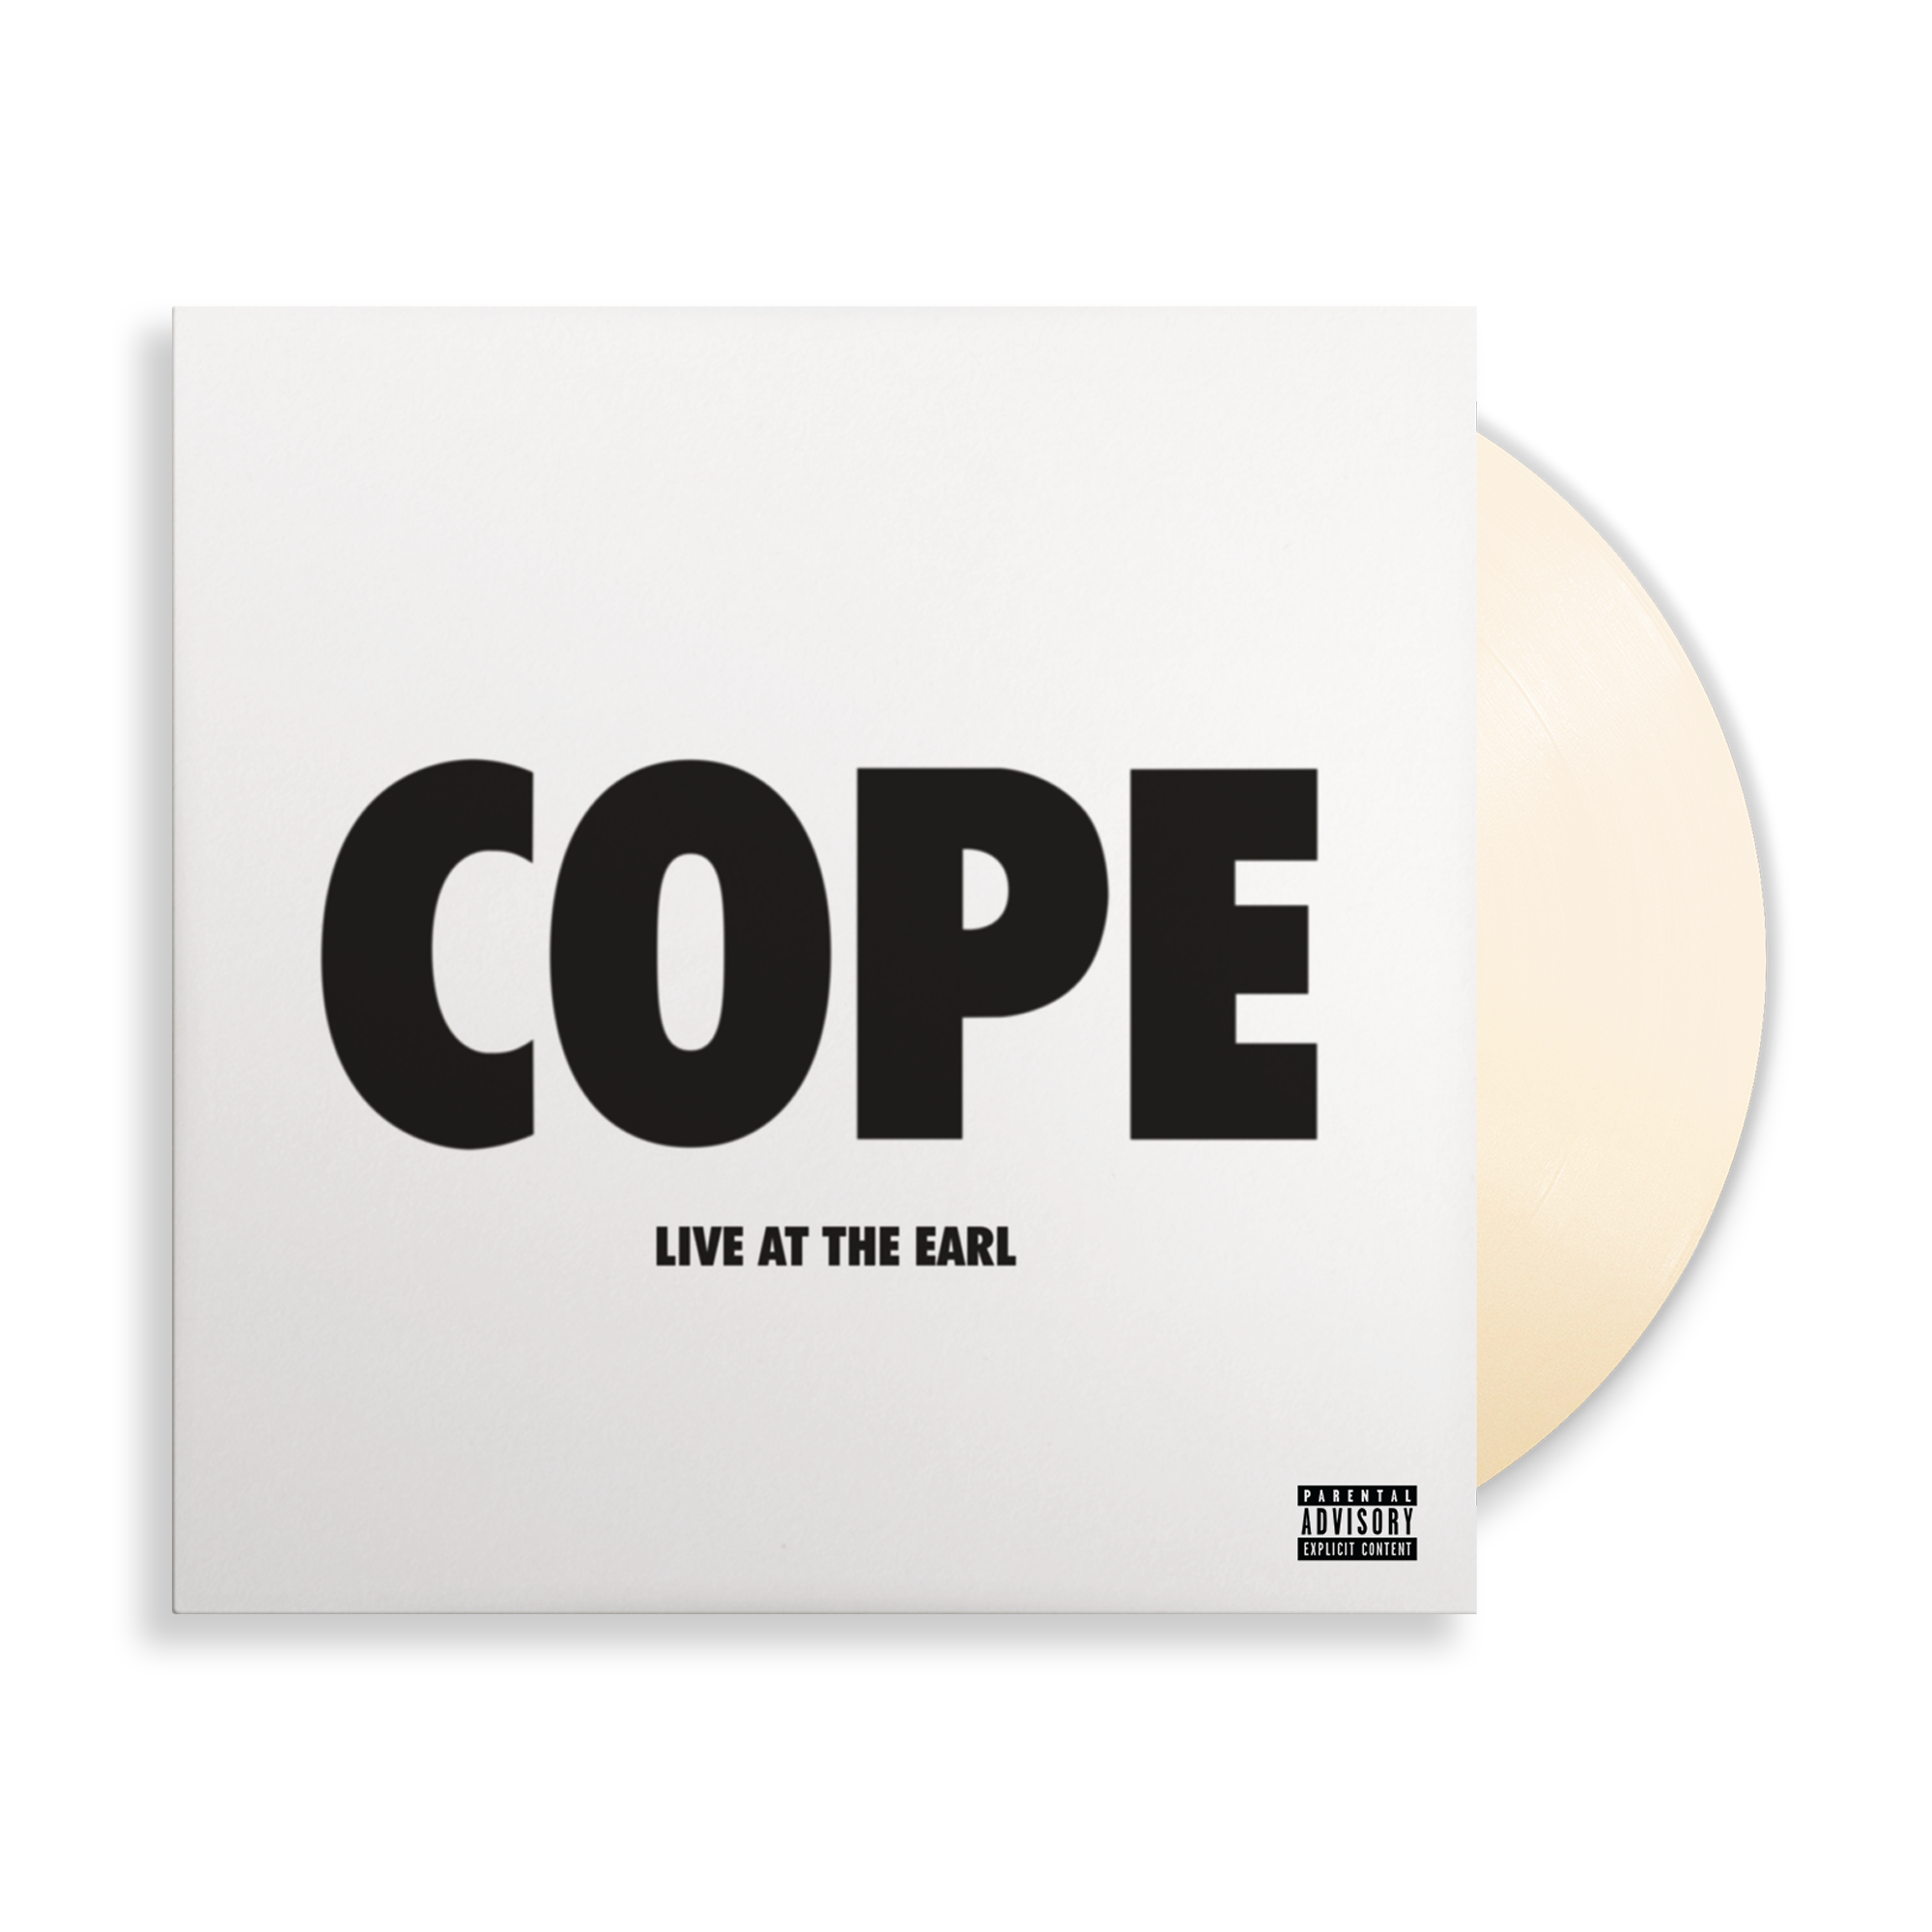 Manchester Orchestra - COPE - Live at The Earl: Limited 'Bone' Vinyl LP